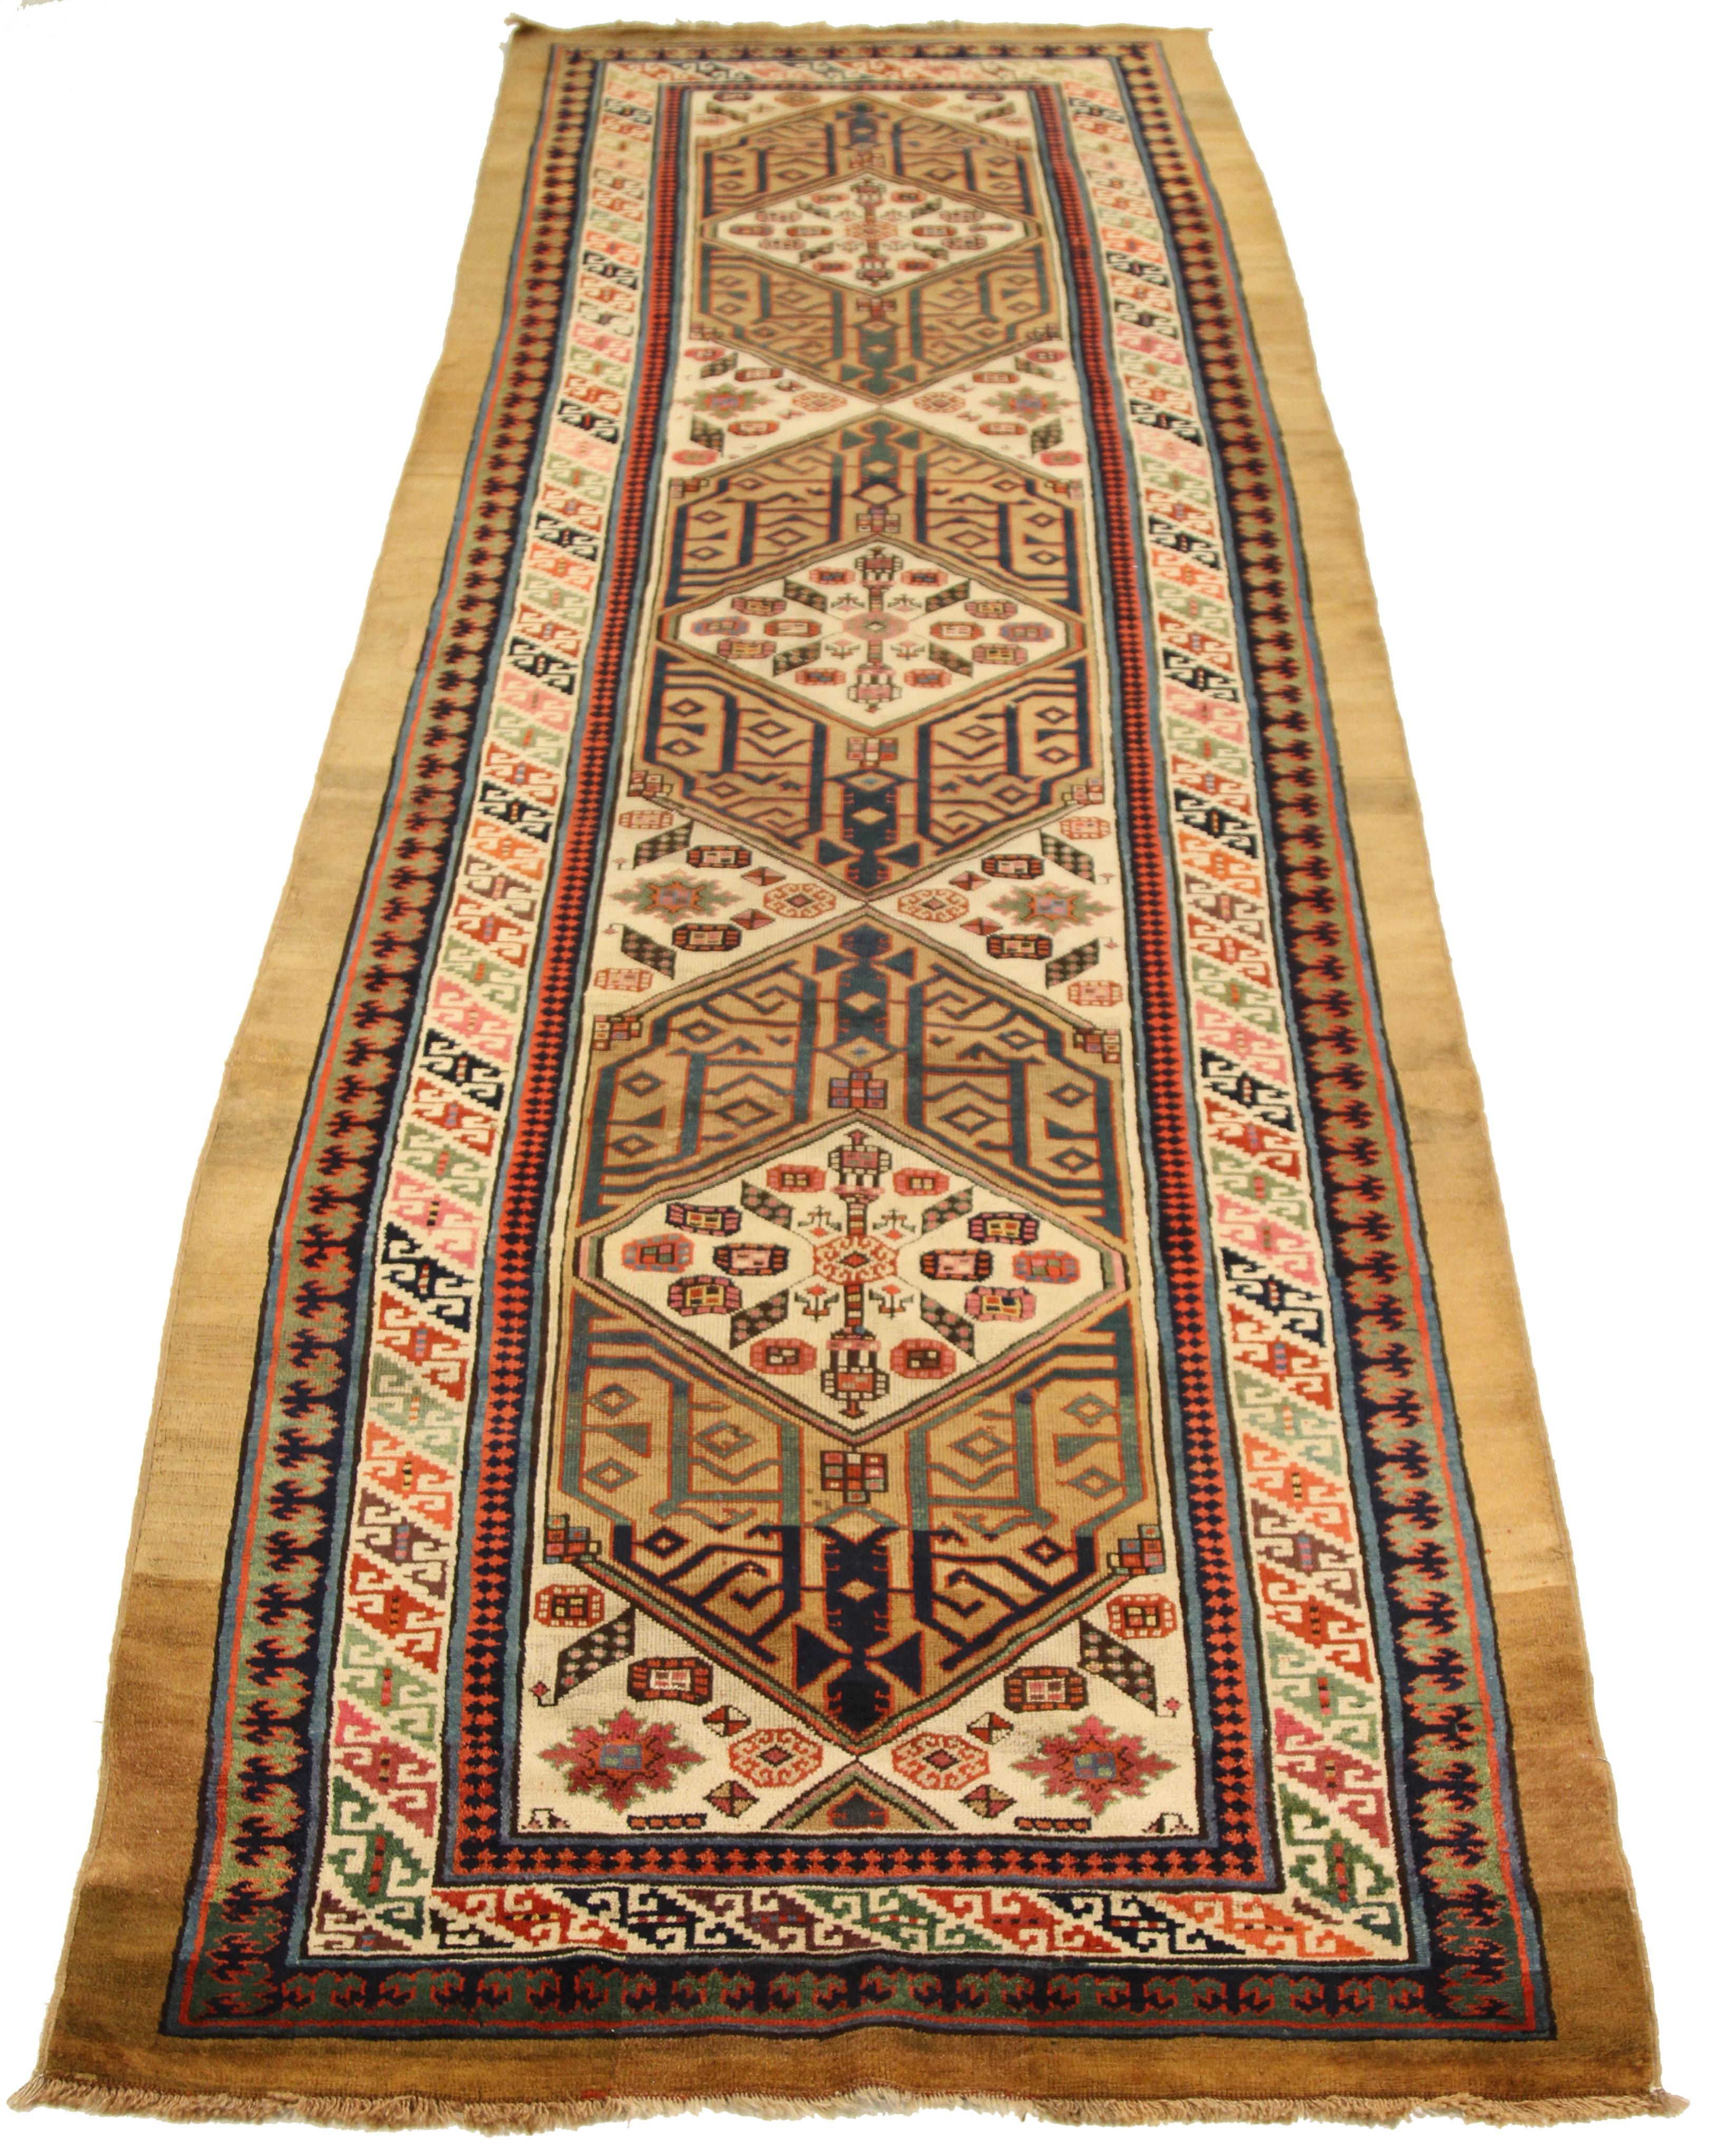 Mid-20th century hand knotted Persian runner rug made from fine wool and all-natural vegetable dyes that are safe for people and pets. This beautiful piece features a blend of geometric and floral details that embody the artistic qualities of the